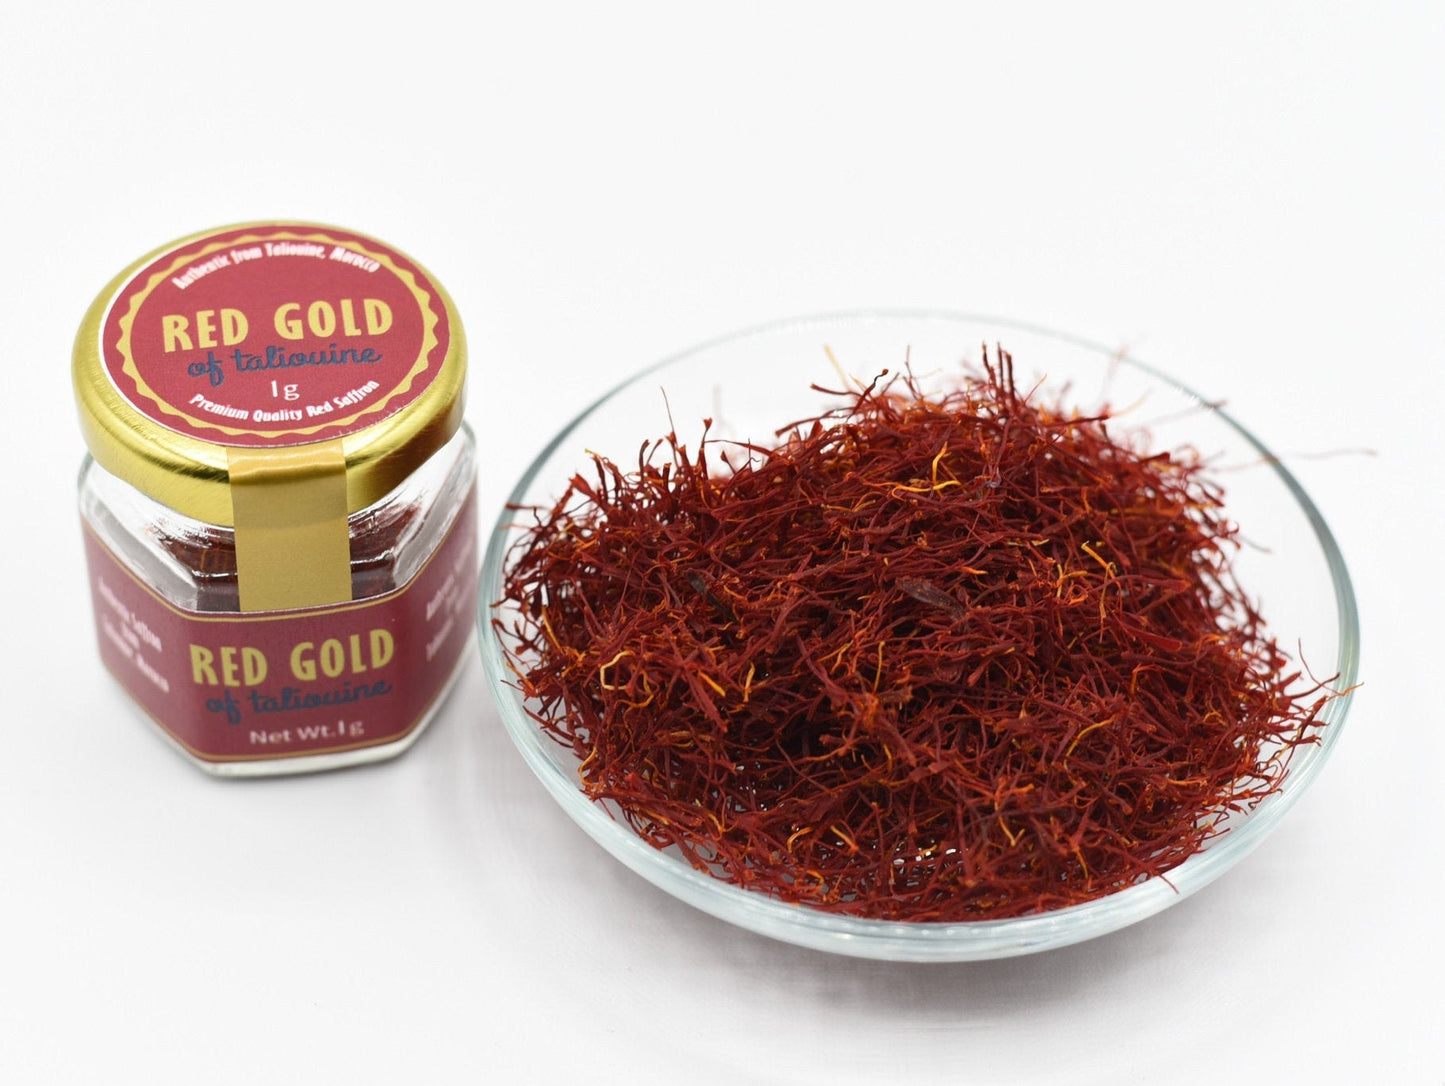 PURE Moroccan Taliouine Saffron Premium Quality No.1 in The World, RED GOLD-For Pilaf, Rice, Teas, Medicinal